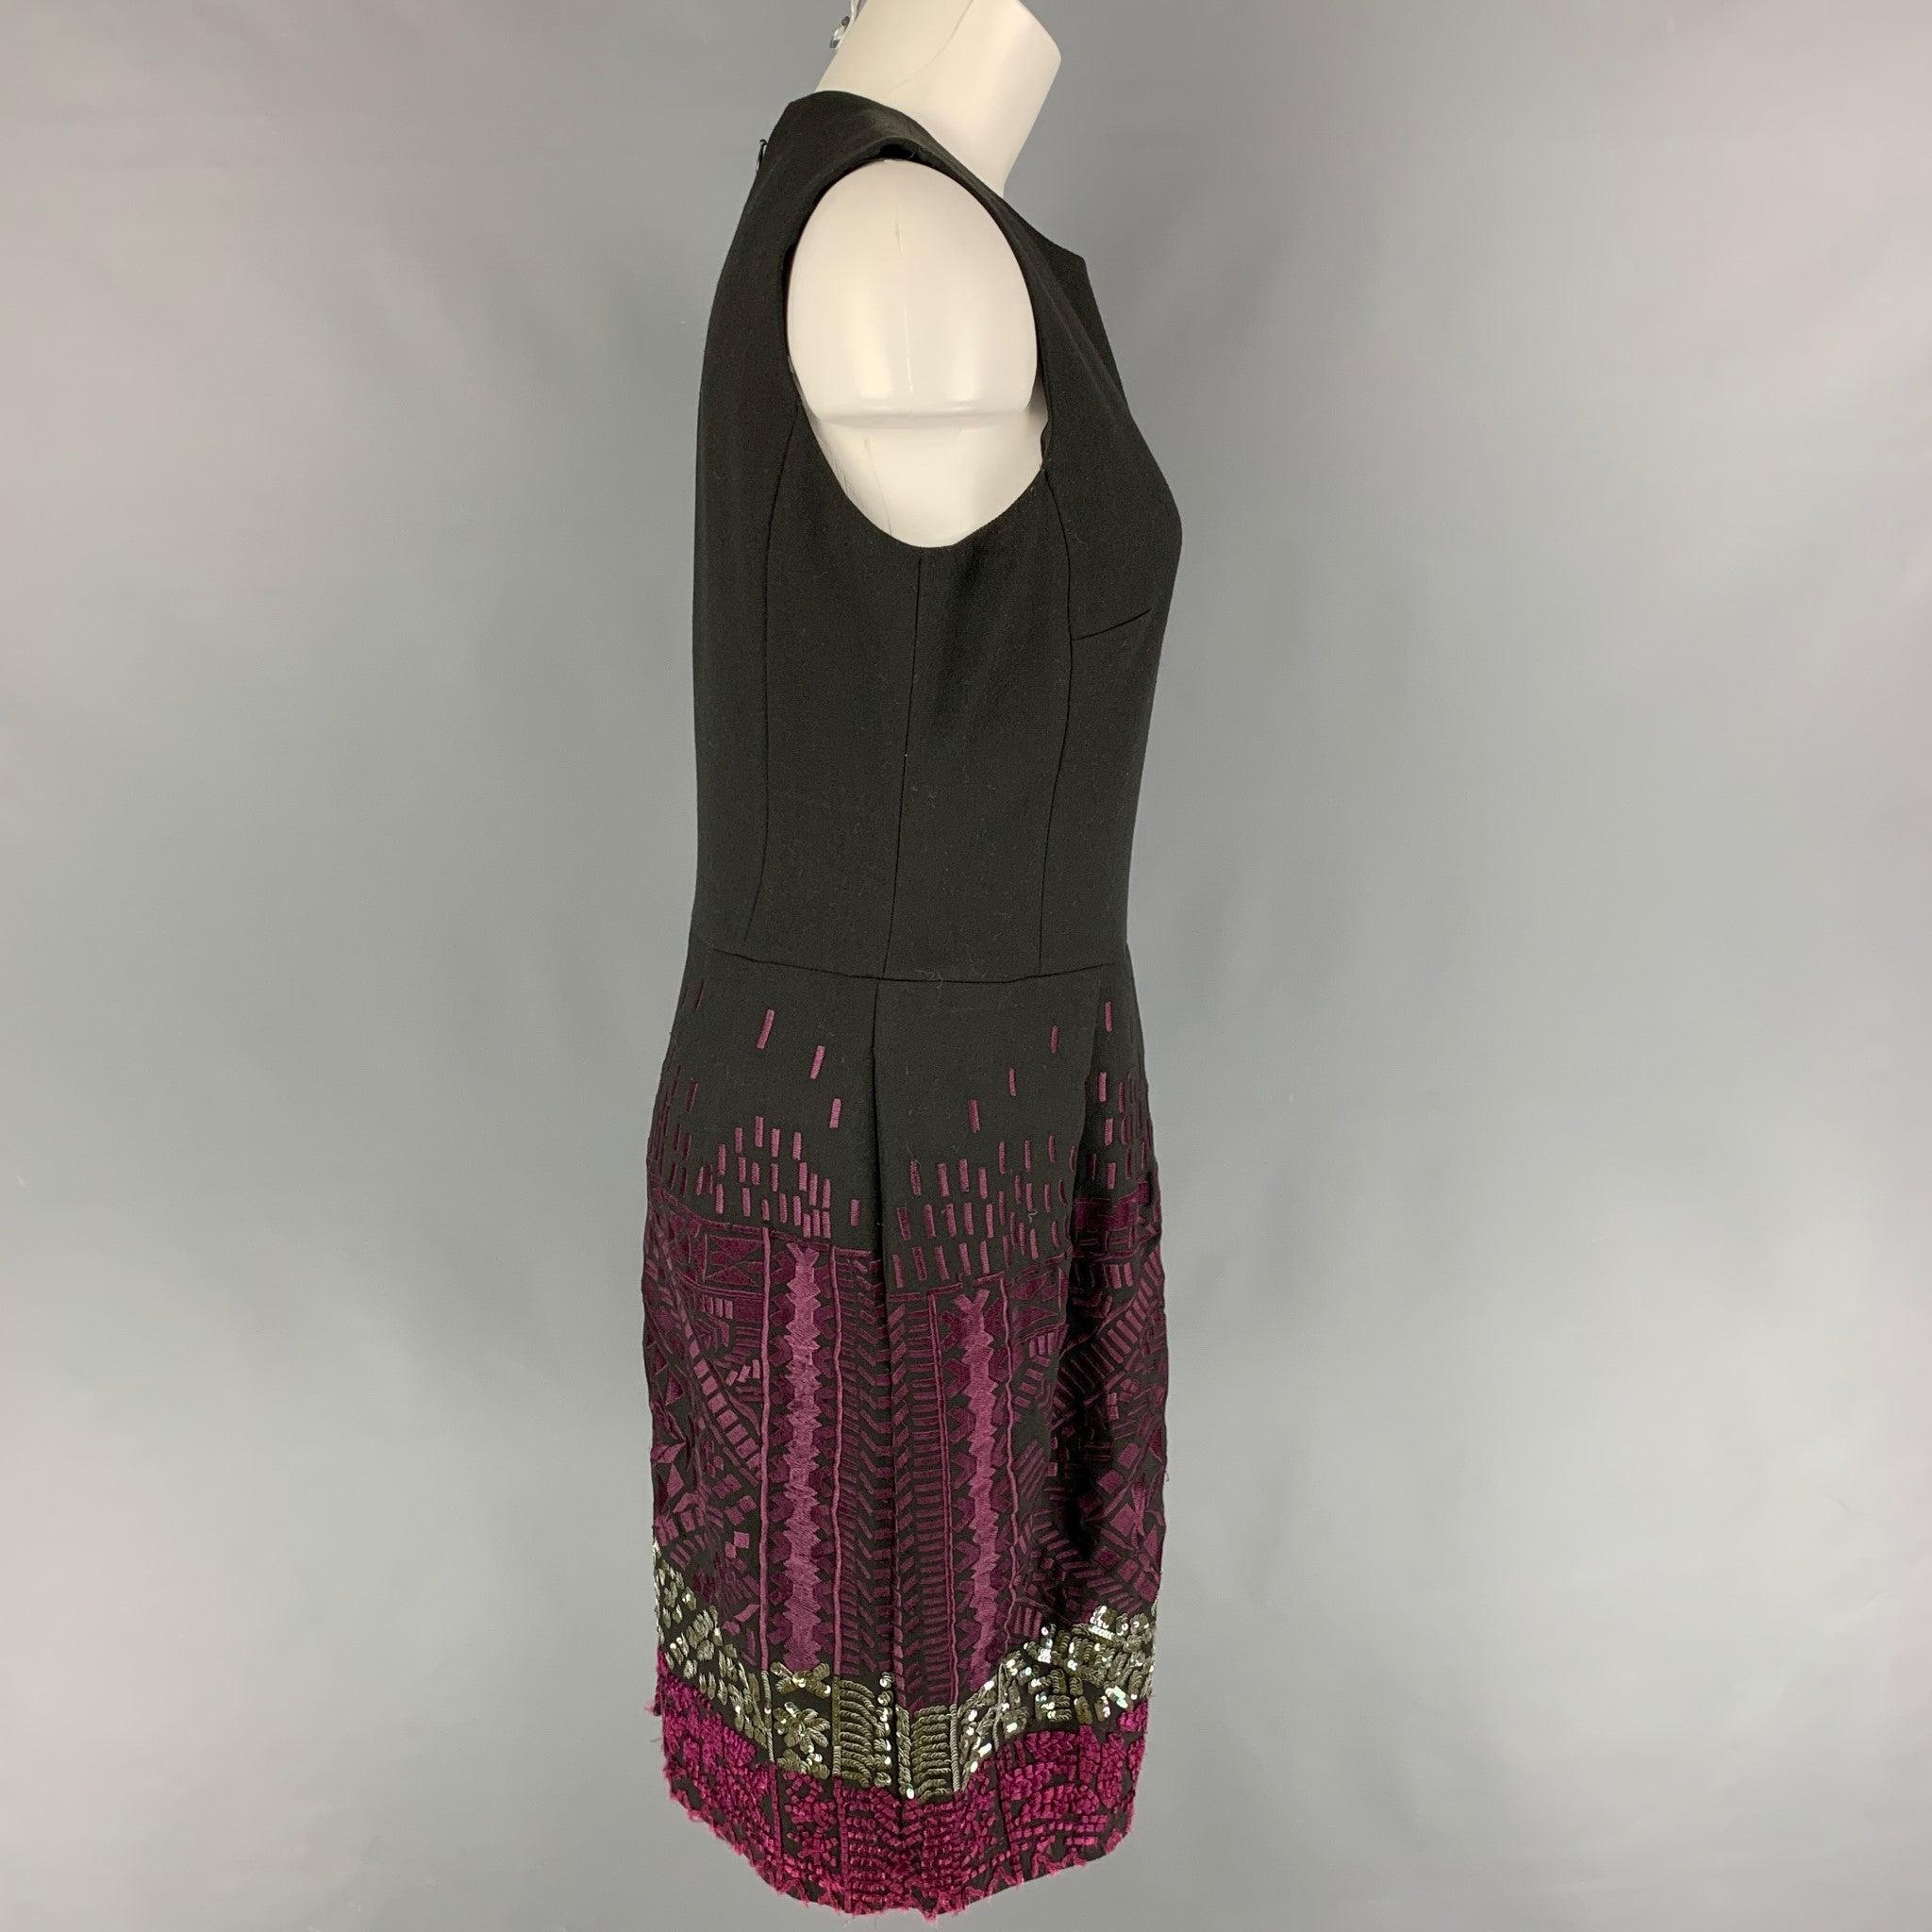 ETRO dress comes in a charcoal wool with embroidered designs featuring a pleated skirt, shift style, sleeveless, and a back zip up closure. Made in Italy.
Very Good
Pre-Owned Condition. 

Marked:   44 

Measurements: 
 
Shoulder: 13.5 inches  Bust: